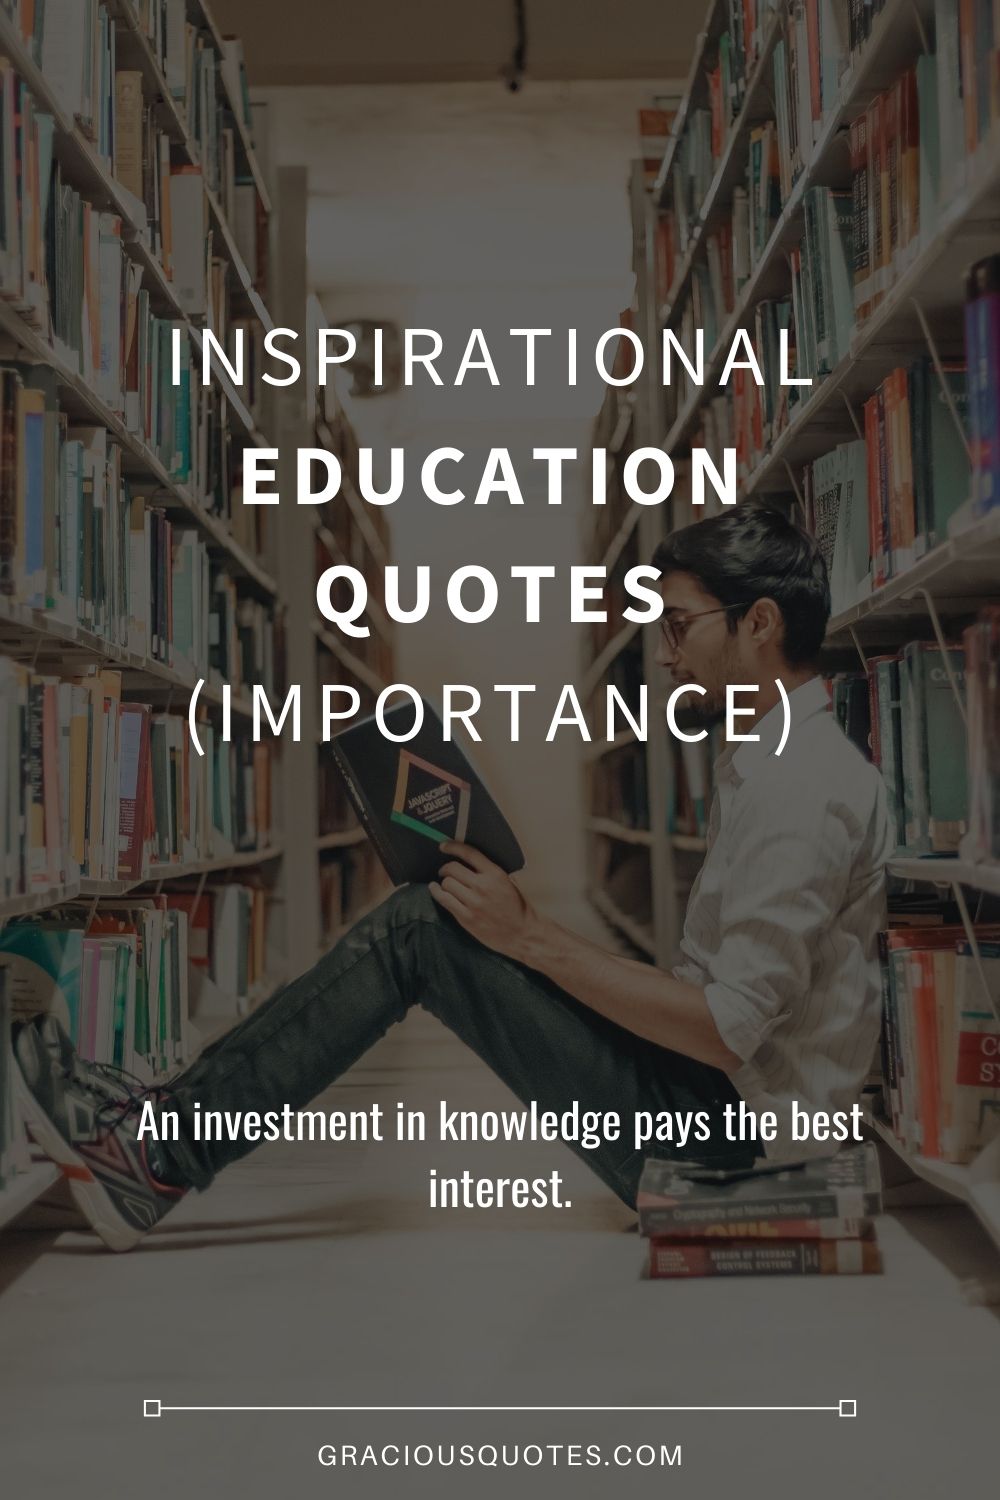 56 Inspirational Education Quotes (IMPORTANCE)